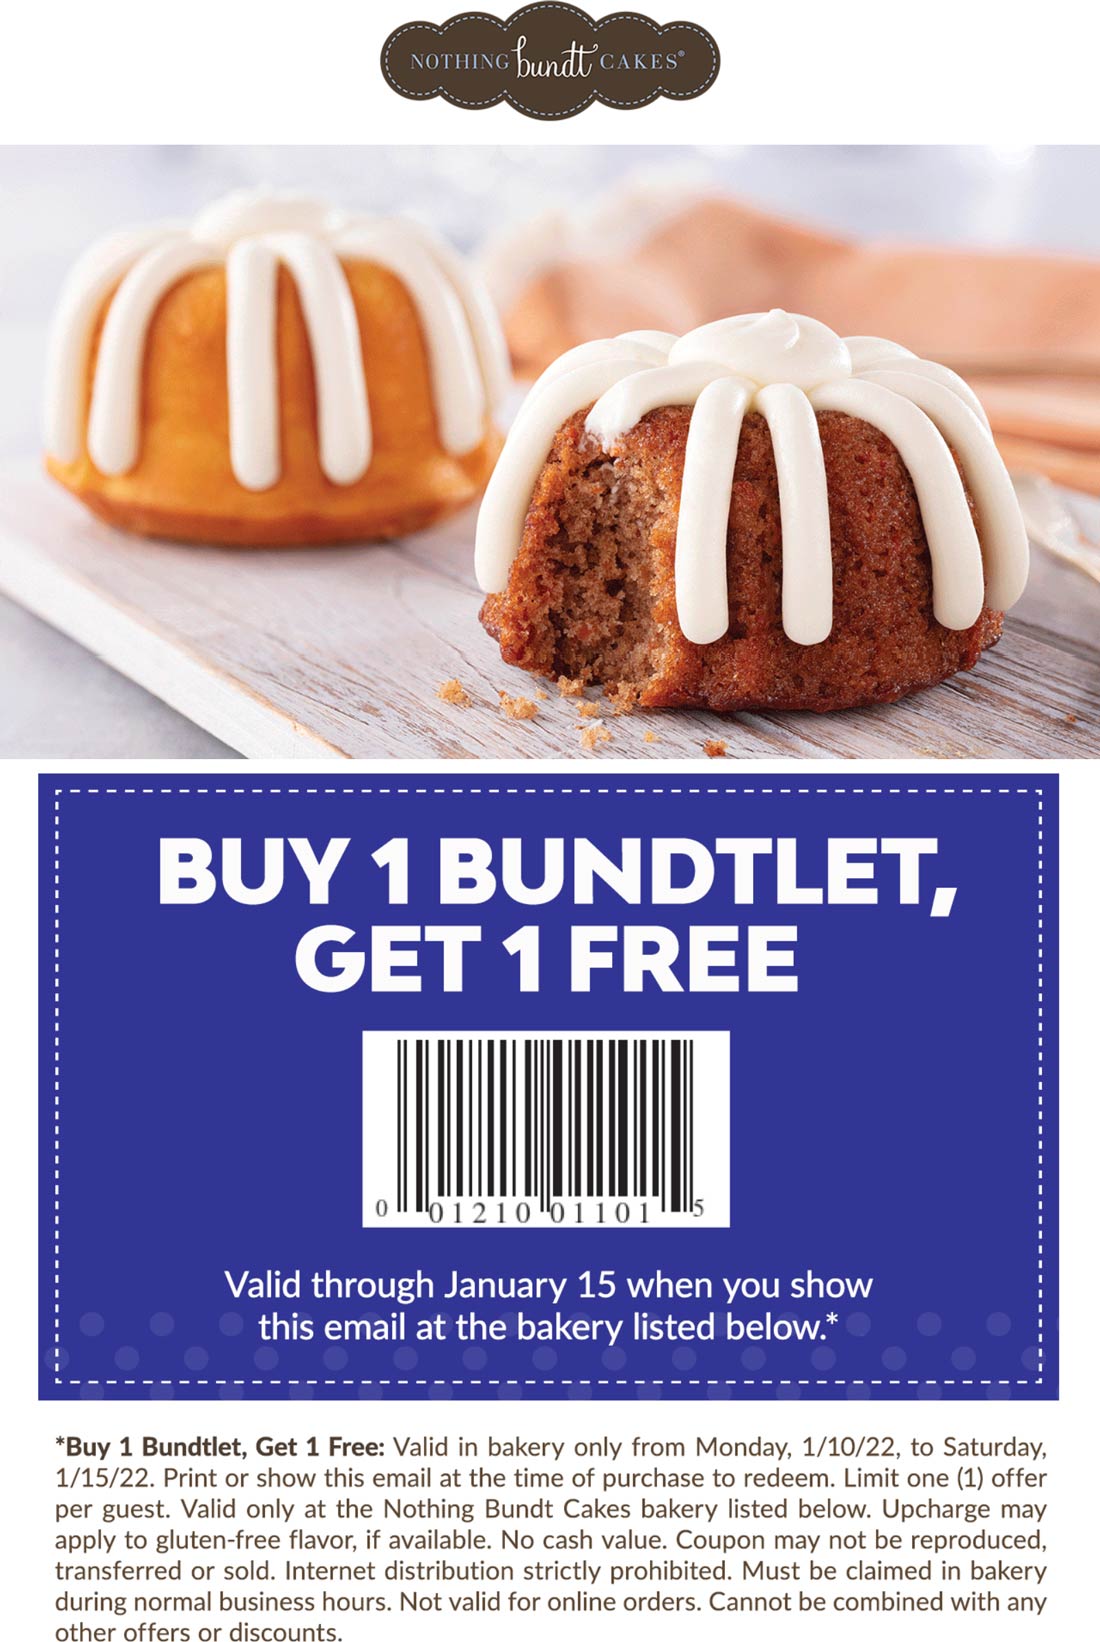 Nothing Bundt Cakes stores Coupon  Second bundtlet free at Nothing Bundt Cakes #nothingbundtcakes 